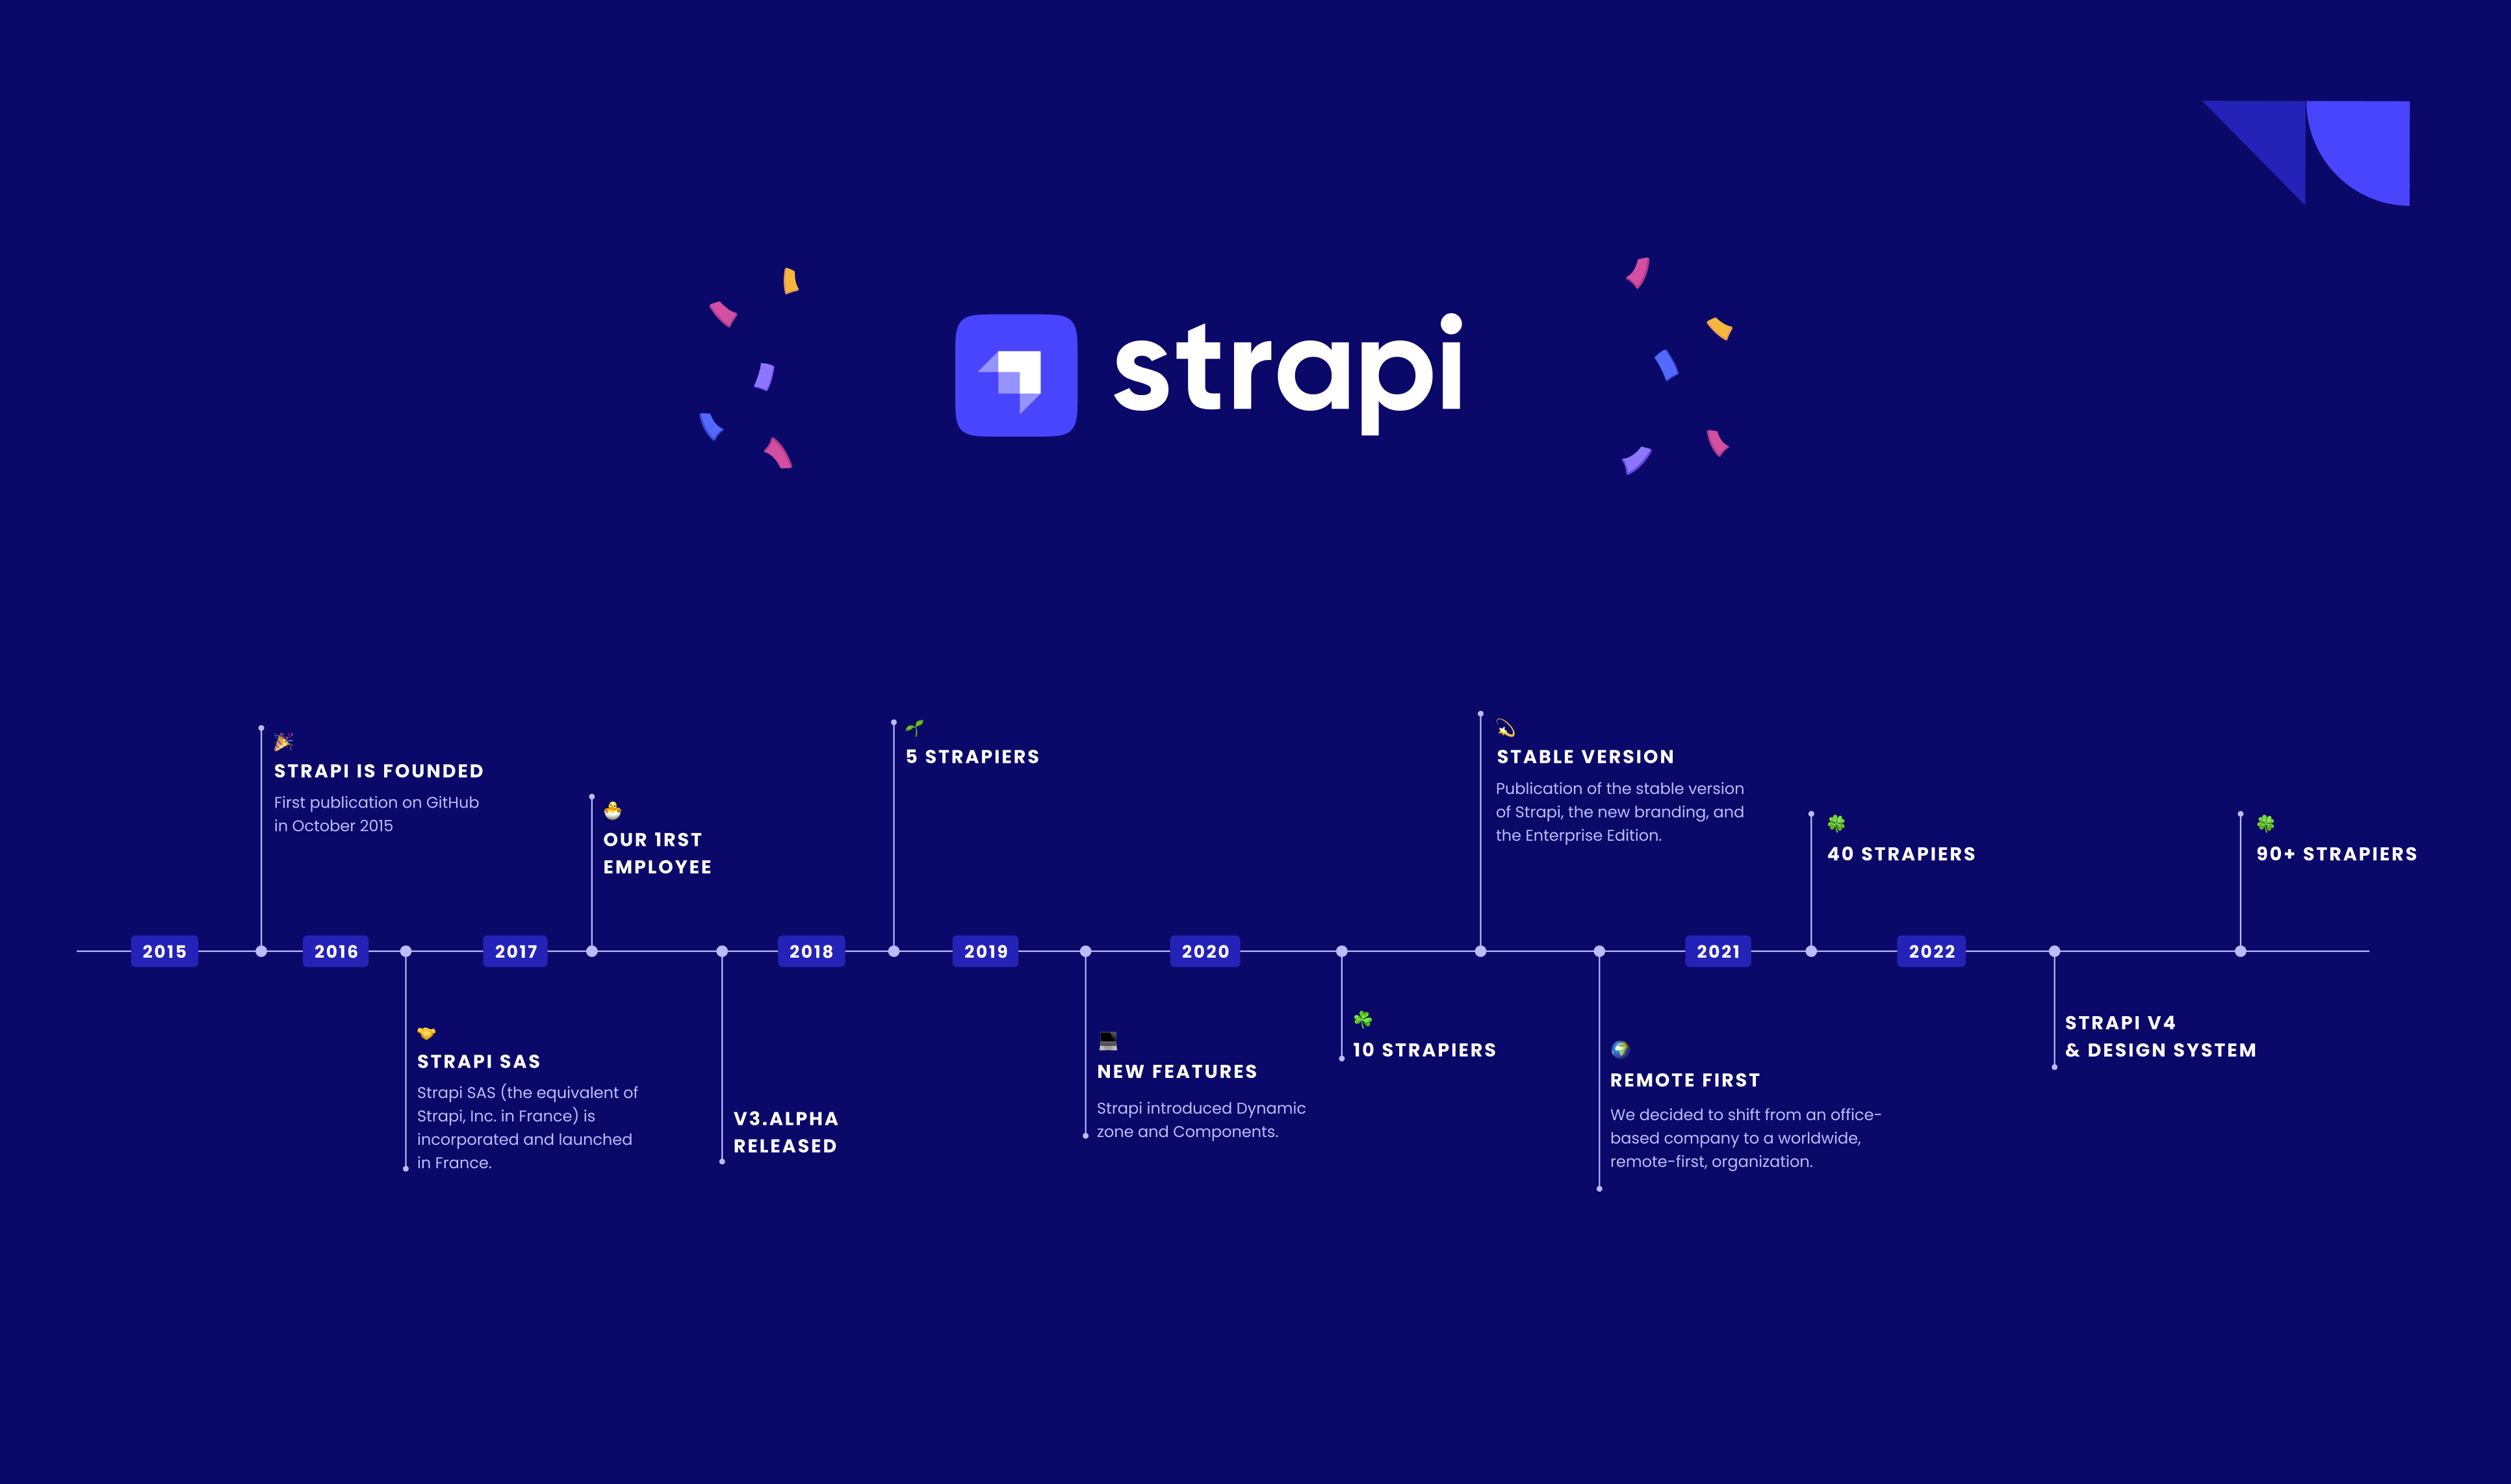 An illustration showing the Strapi logo and some confetti.